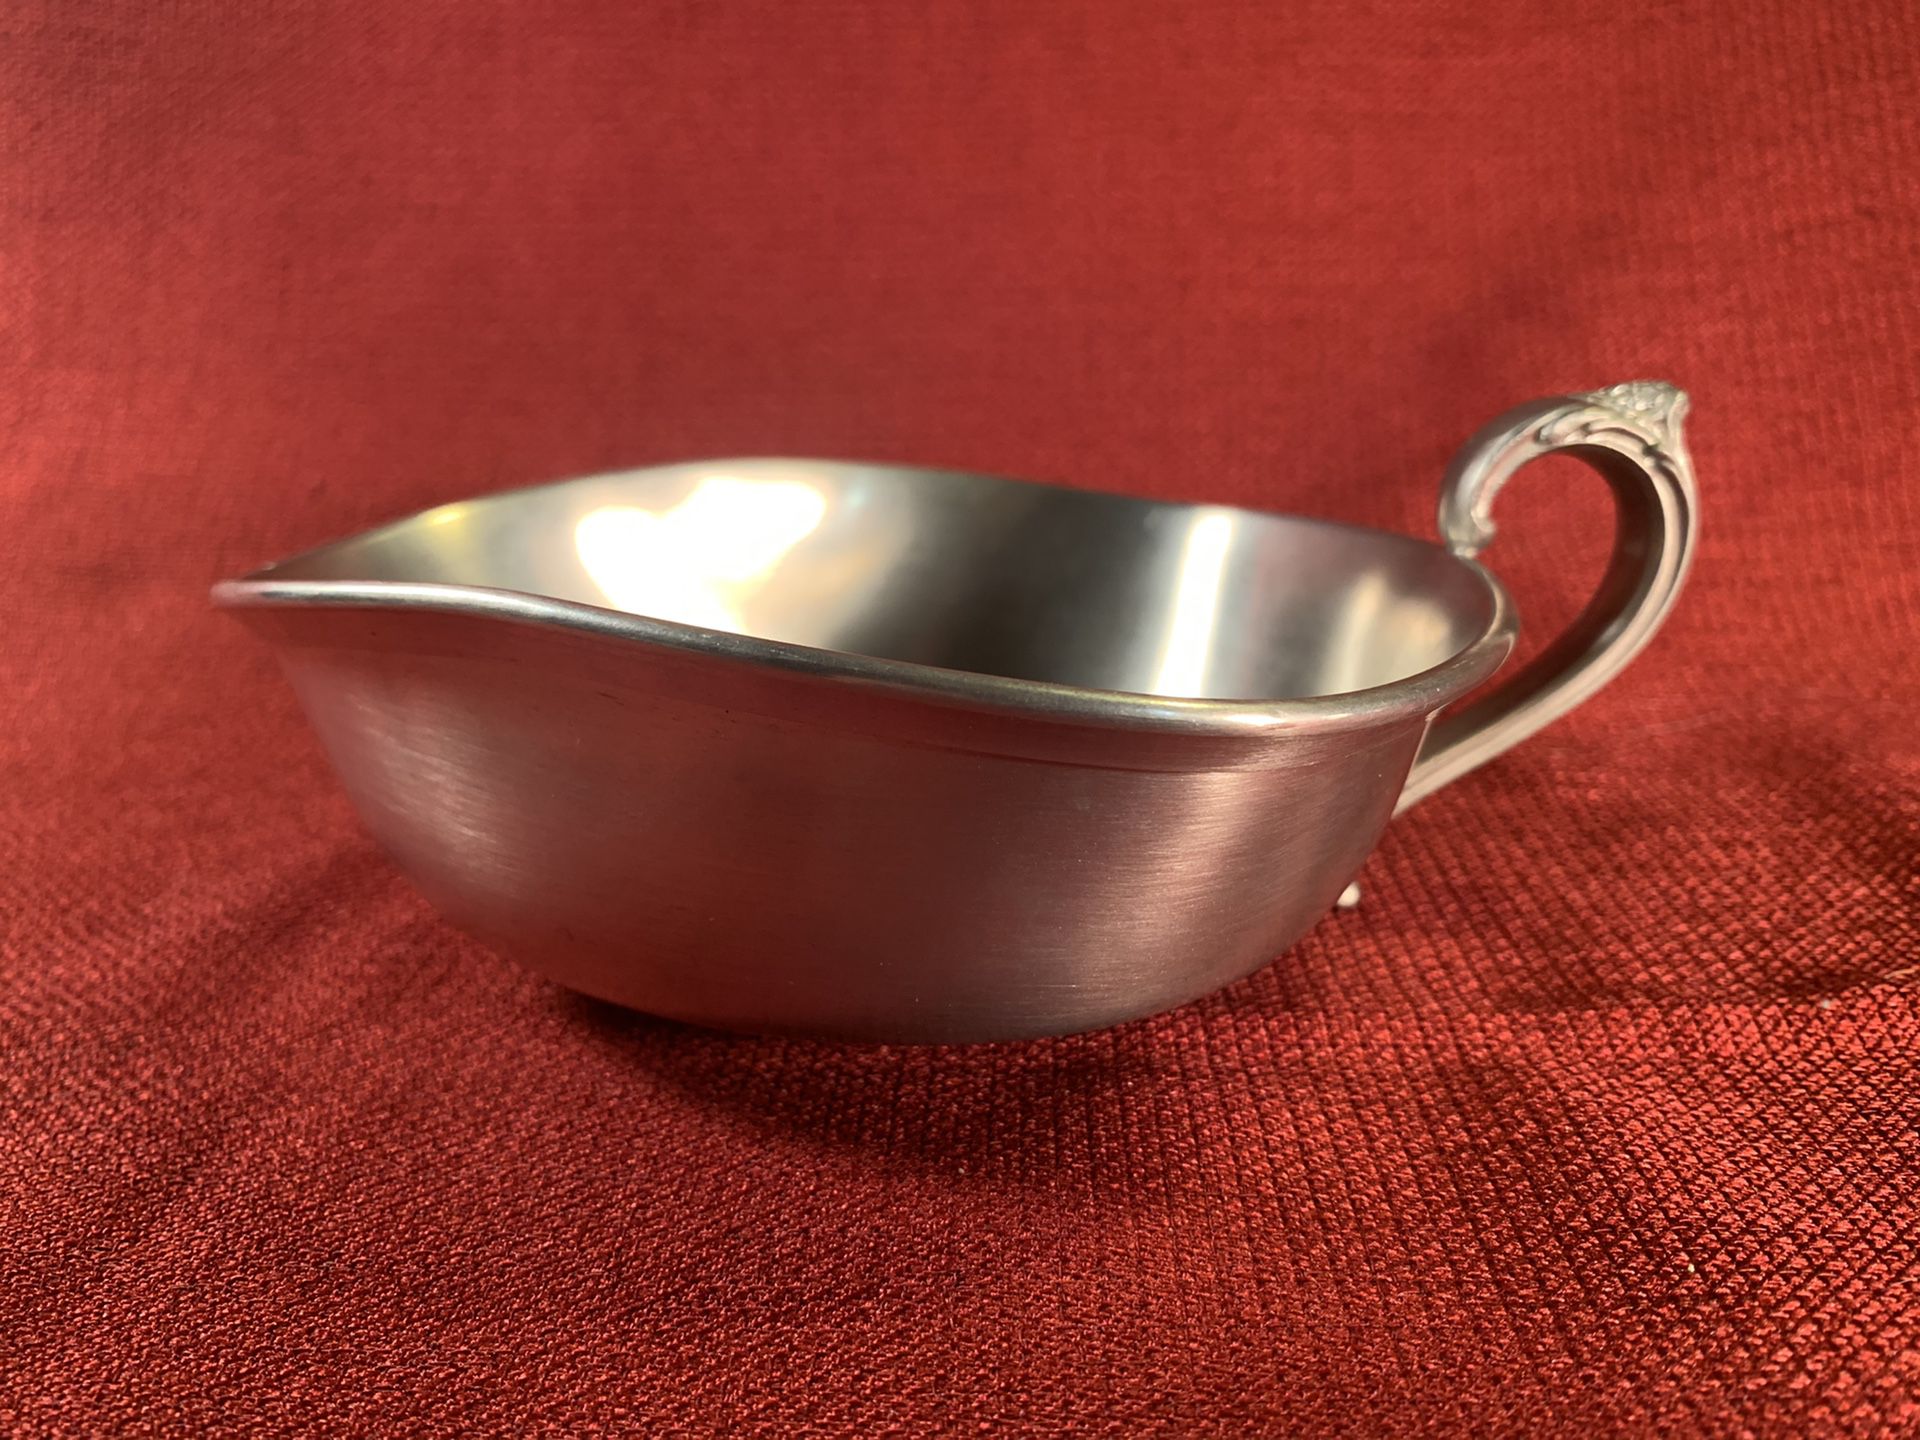 CONNECTICUT HOUSE PEWTERERS Vintage Handcrafted Pewter Handled Candy/Nut Dish (Length: 6-3/4”)